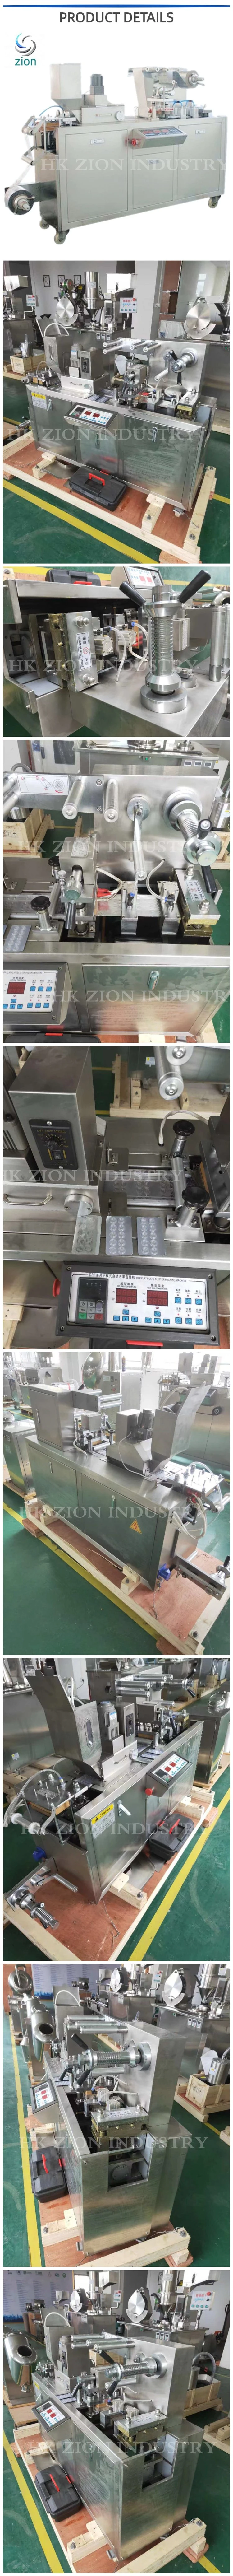 Plastic Blister Packing Machine Automatic Capsule Blister Sealing Machine Tablet Blister Packing Machine Price Capsule Packaging Machine